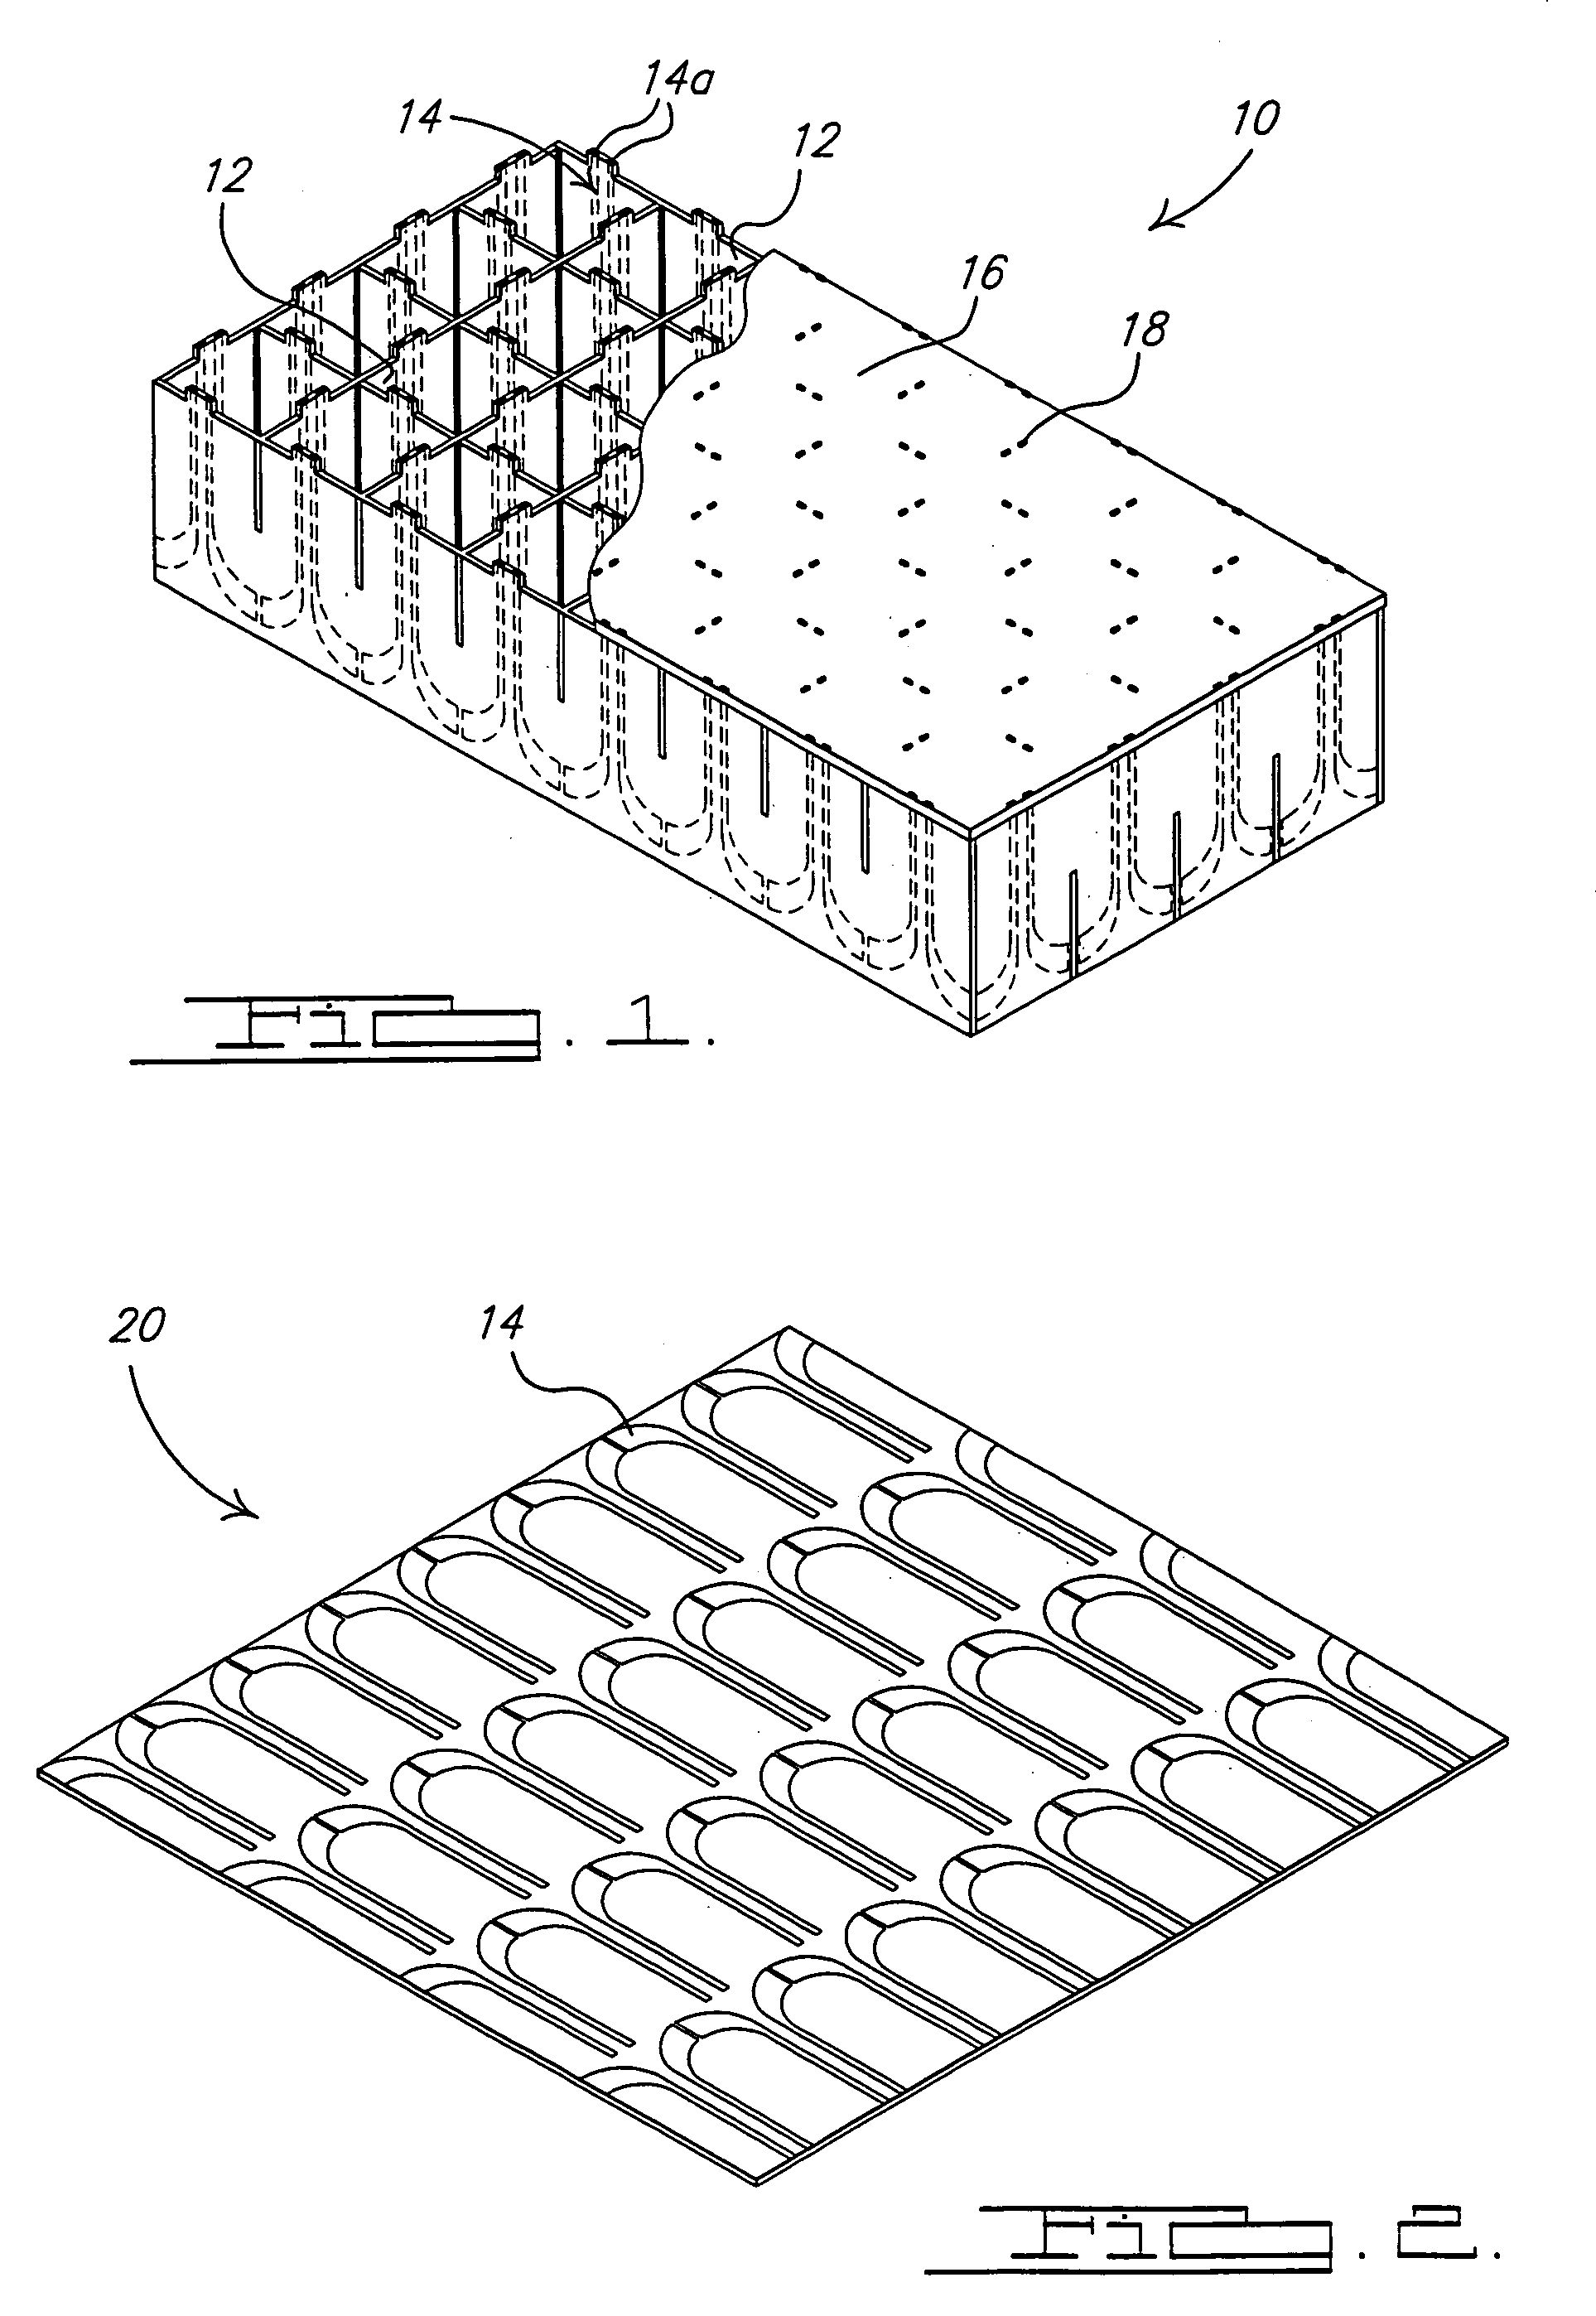 Design and fabrication methodology for a phased array antenna with shielded/integrated feed structure